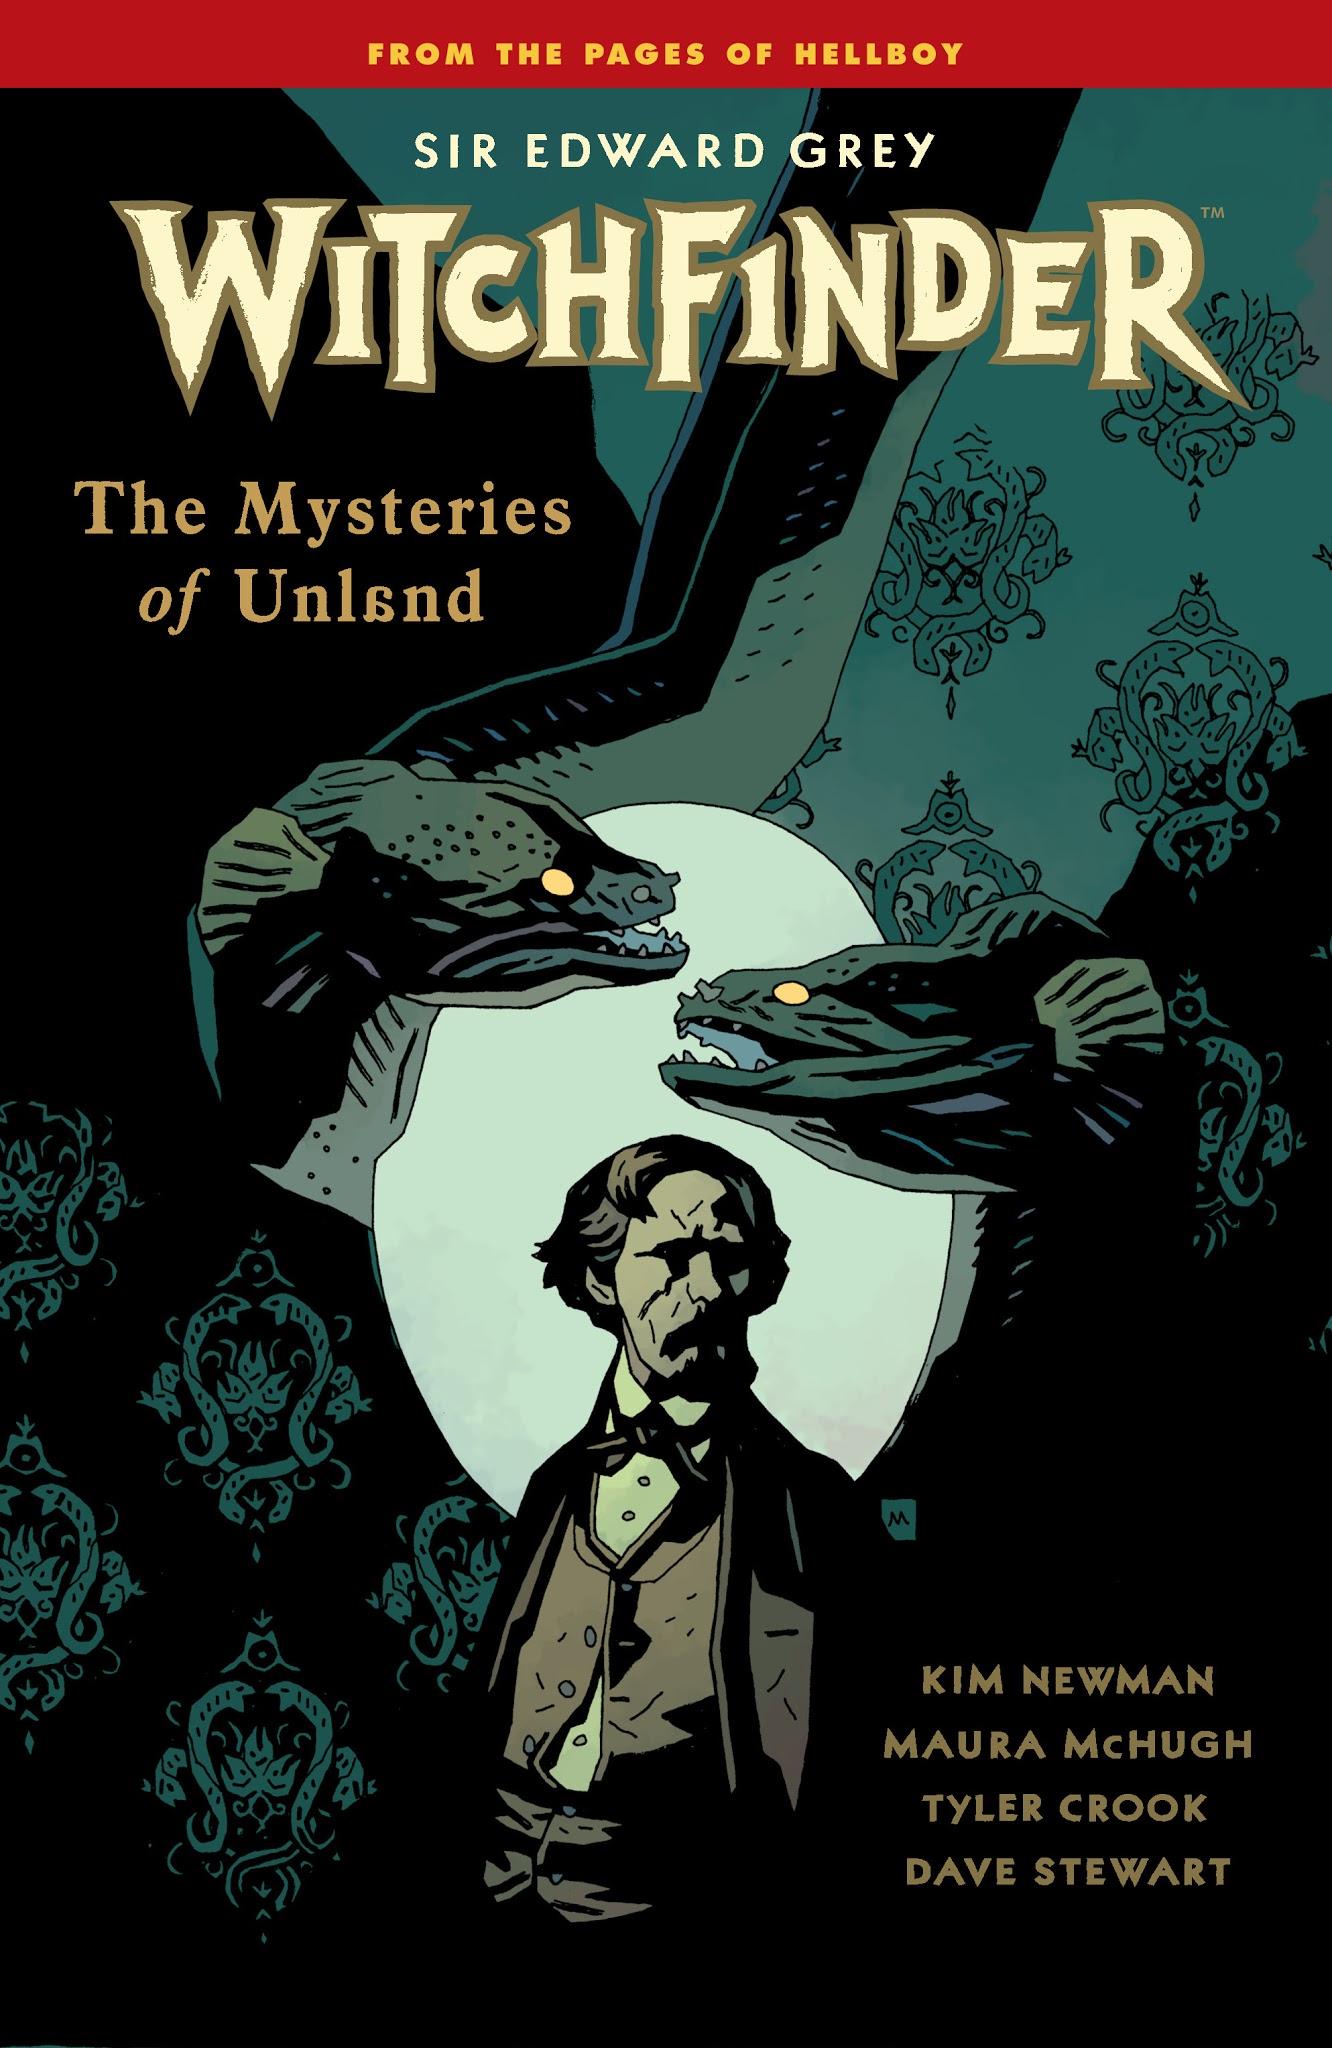 Read online Sir Edward Grey, Witchfinder: The Mysteries of Unland comic -  Issue # TPB - 1